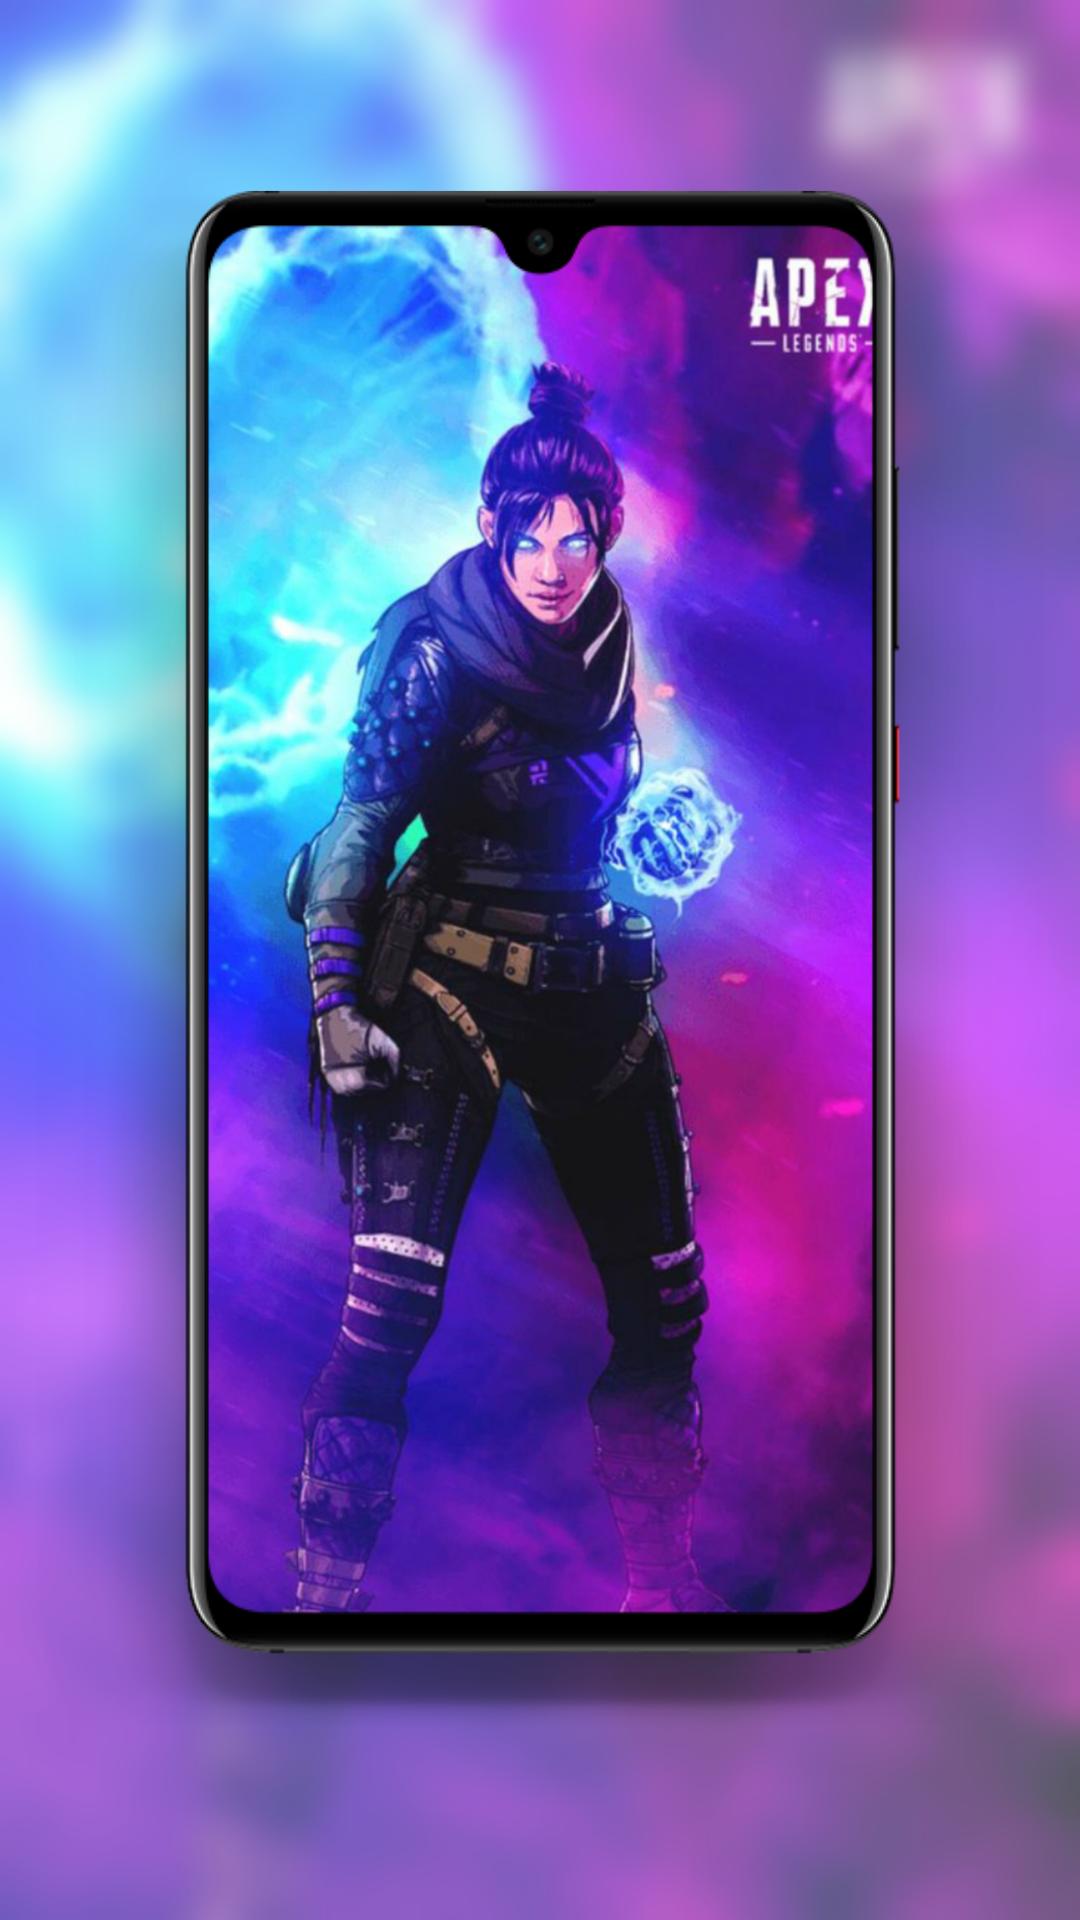 Apex Wallpaper For Android Apk Download